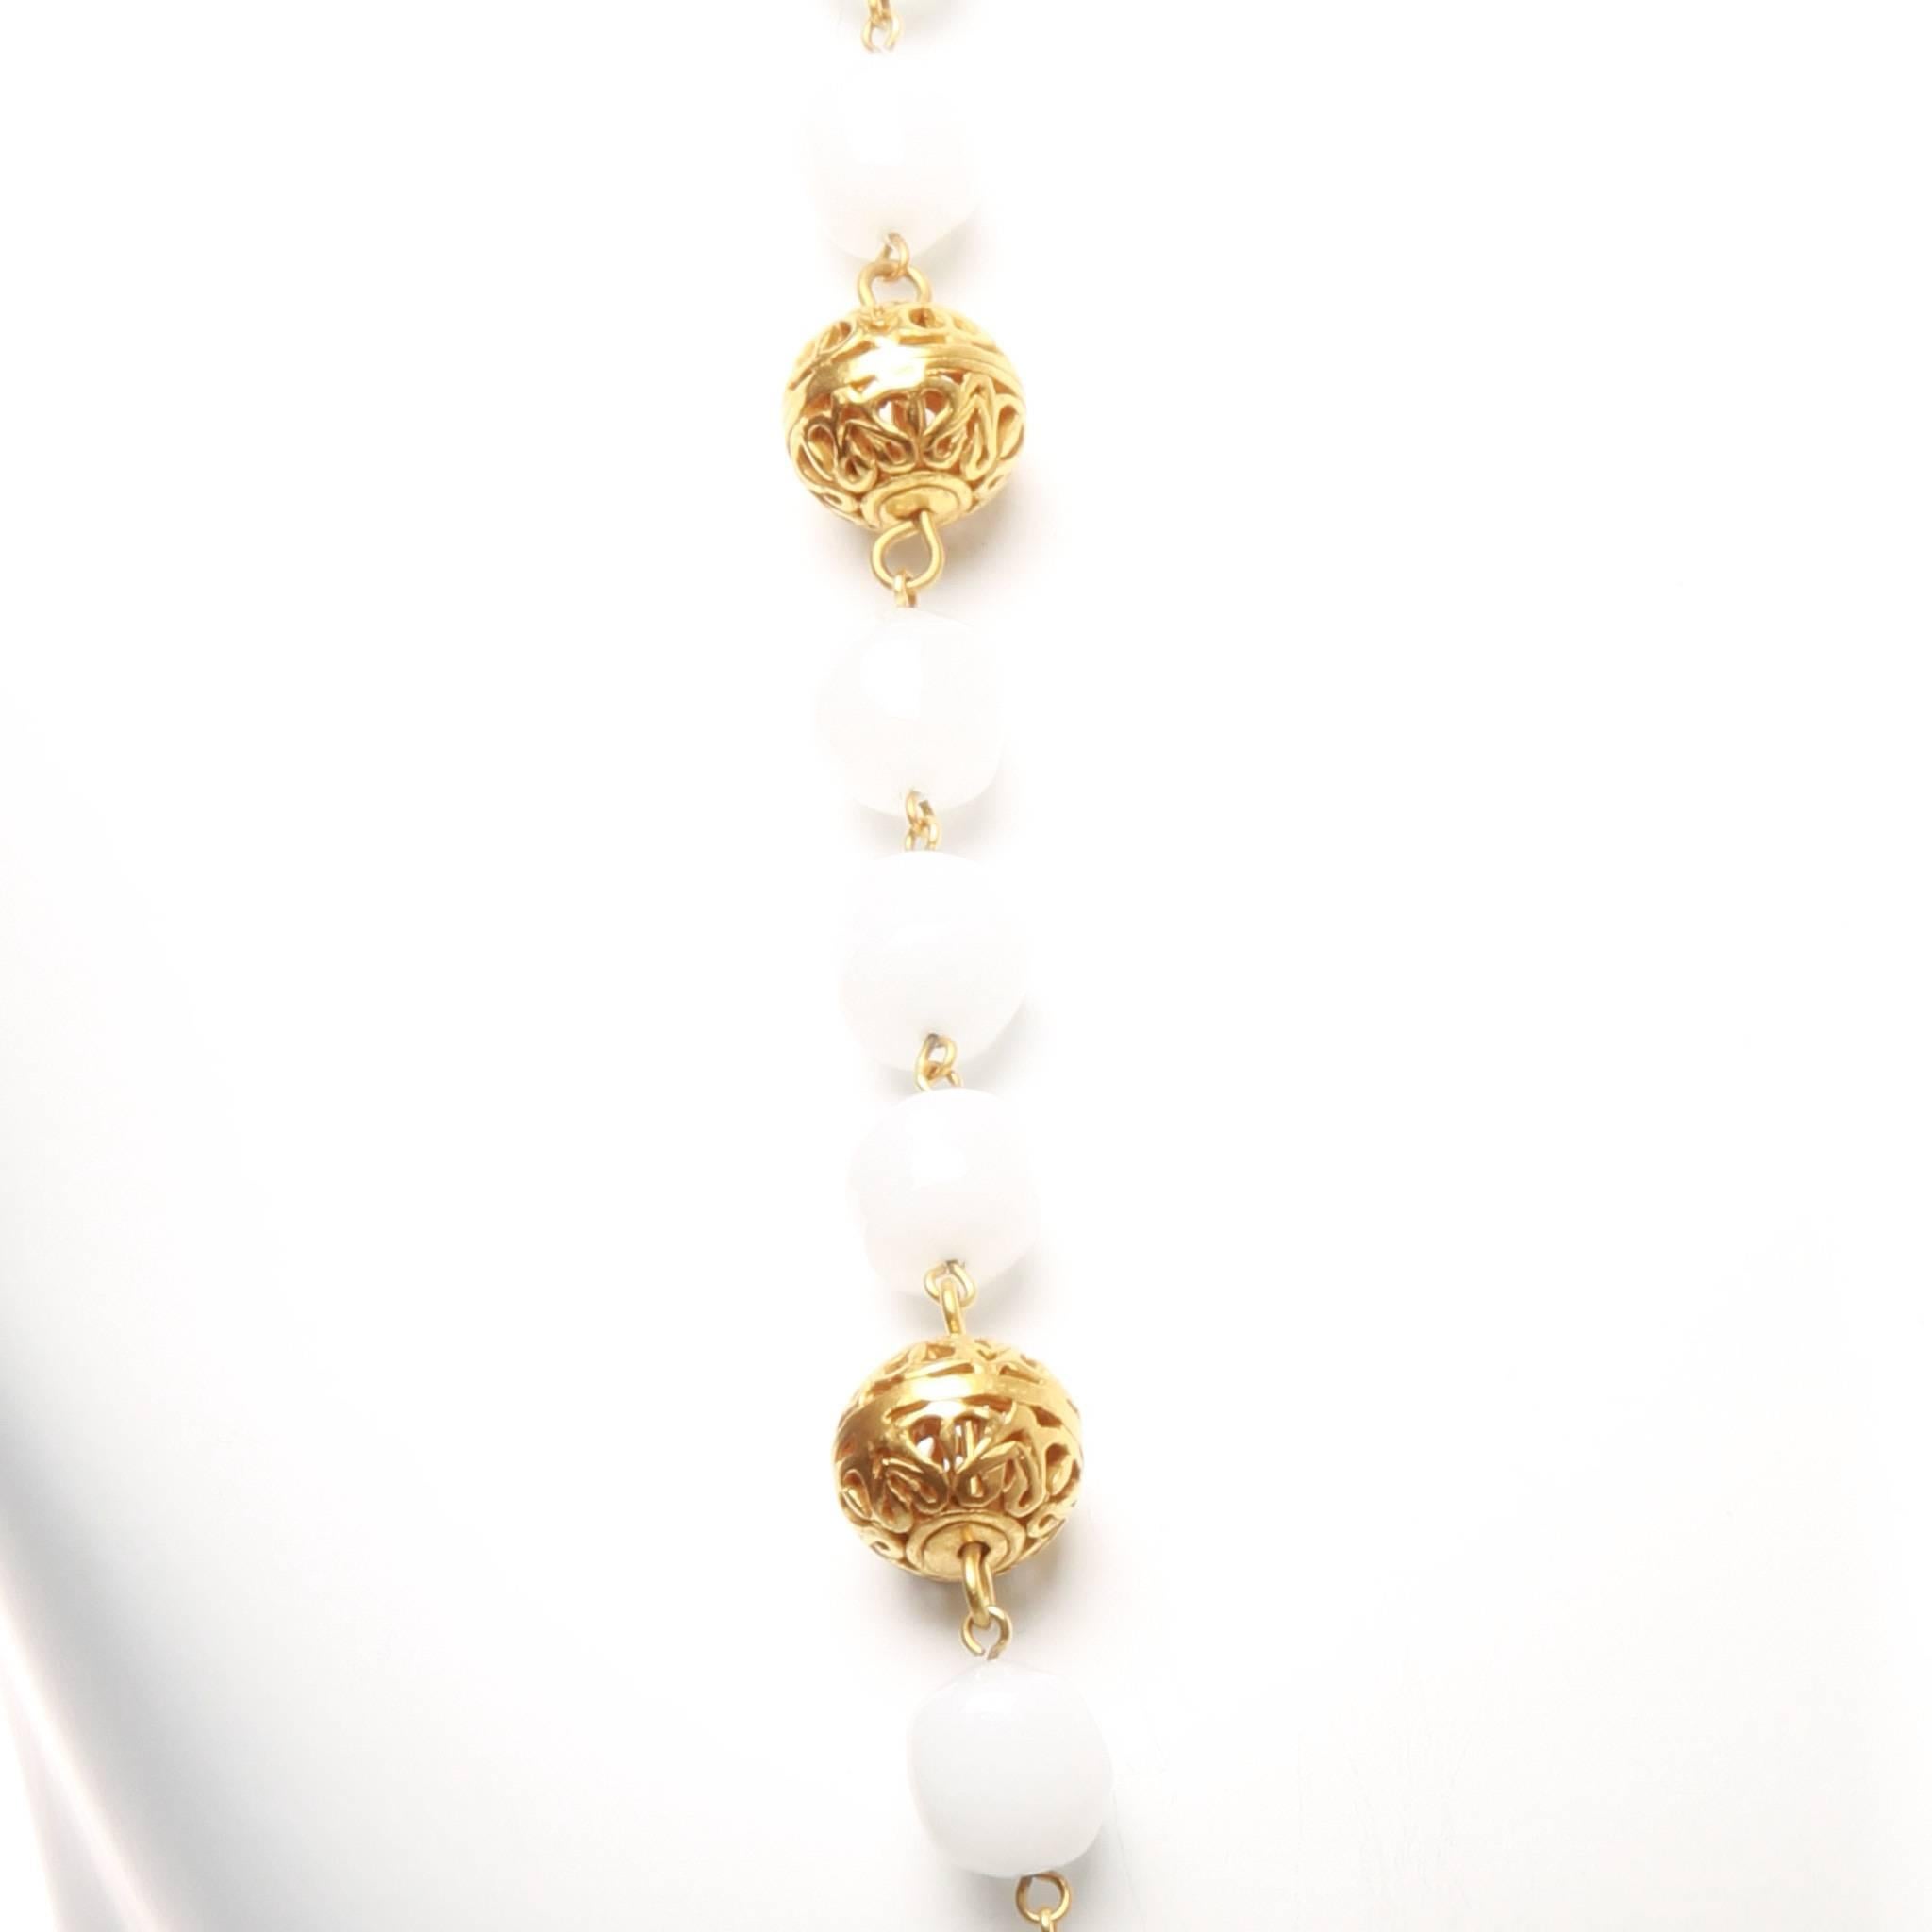 FINAL SALE

Chanel white glass and gold beaded necklace featuring gold-tone metal accents.

Fastener: Hook closure with CC accent.

Stamped 95 A - Fall 1995